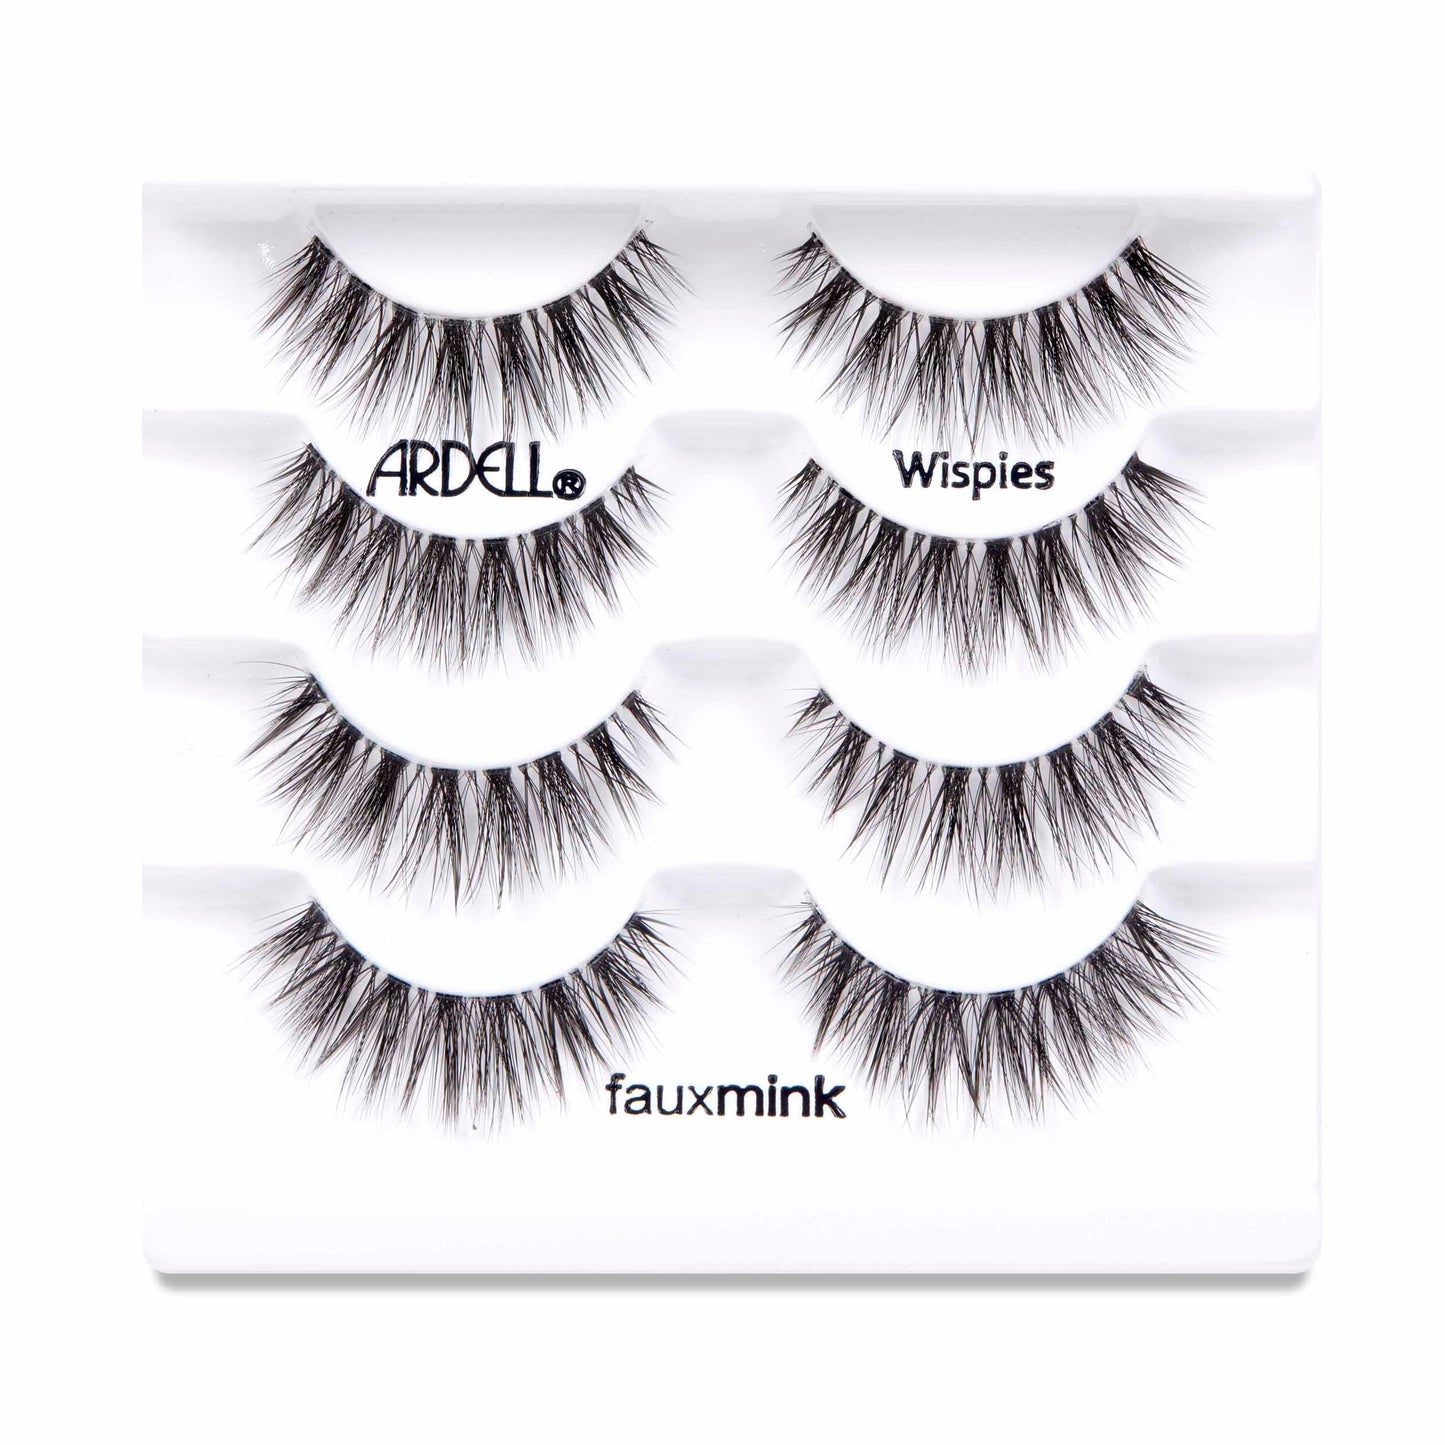 Ardell Faux Mink Individuals Long, Ardell Faux Mink Lashes